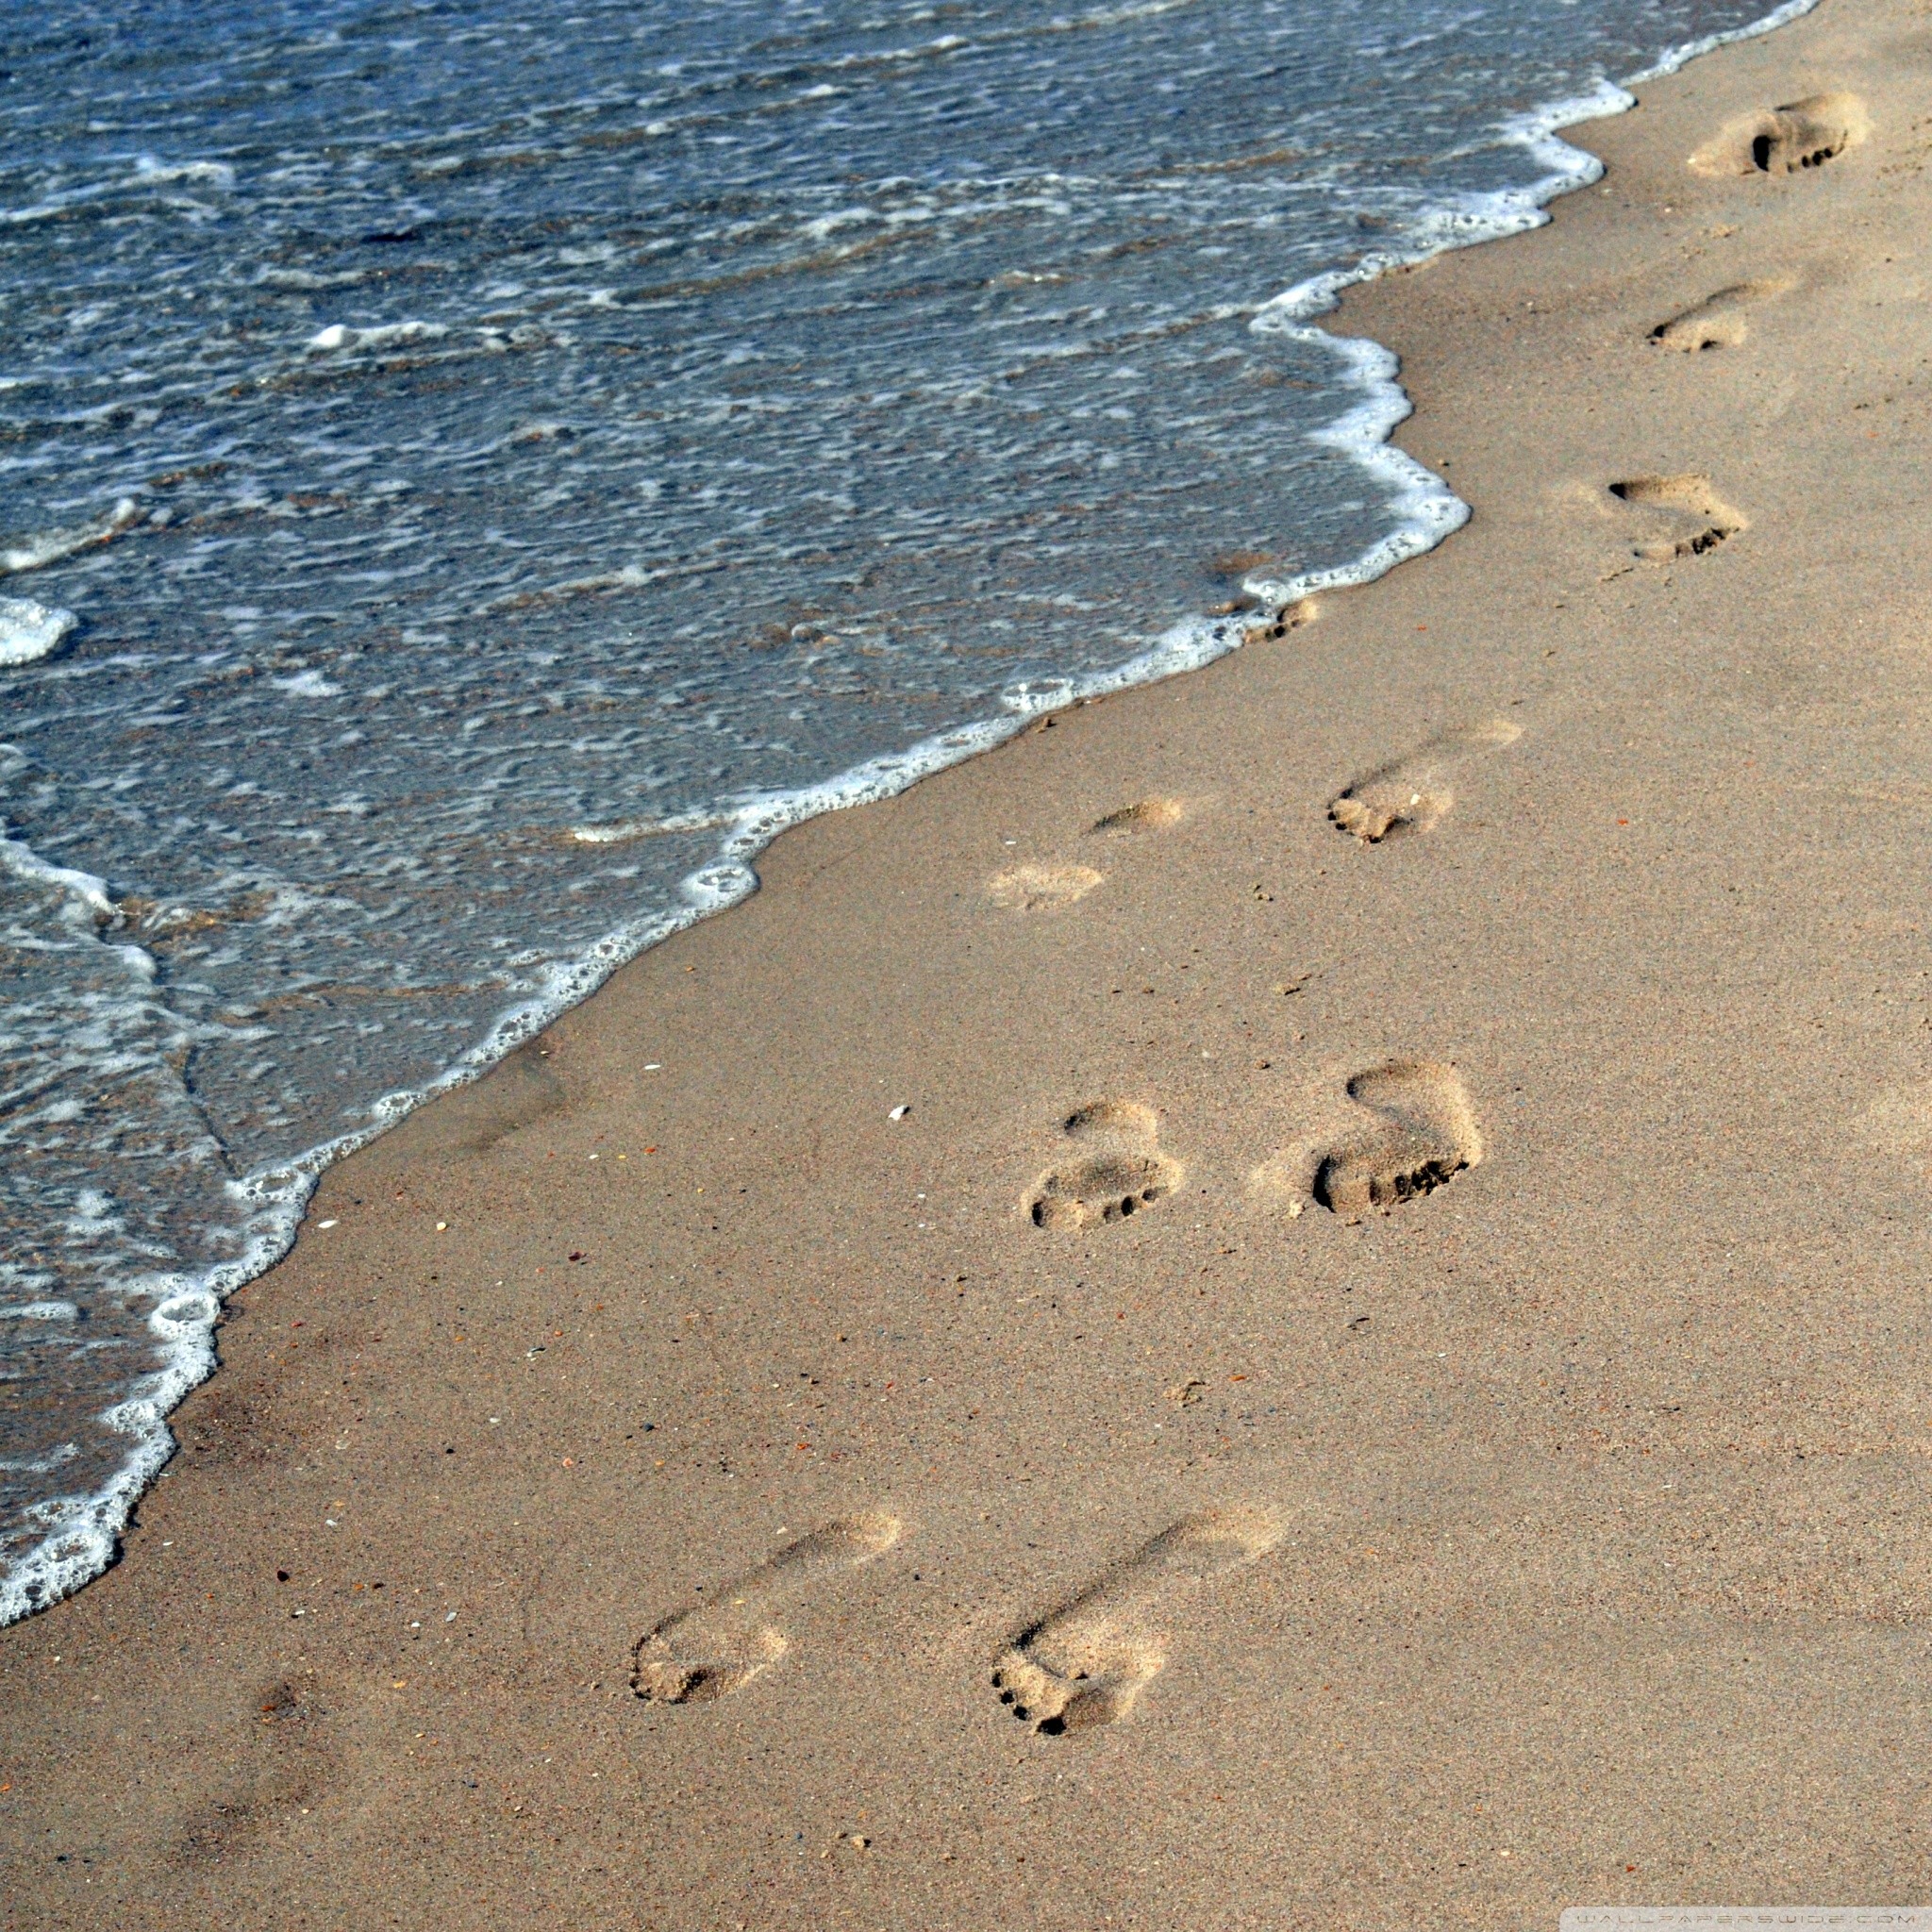 footprints-in-the-sand-wallpaper-49-images